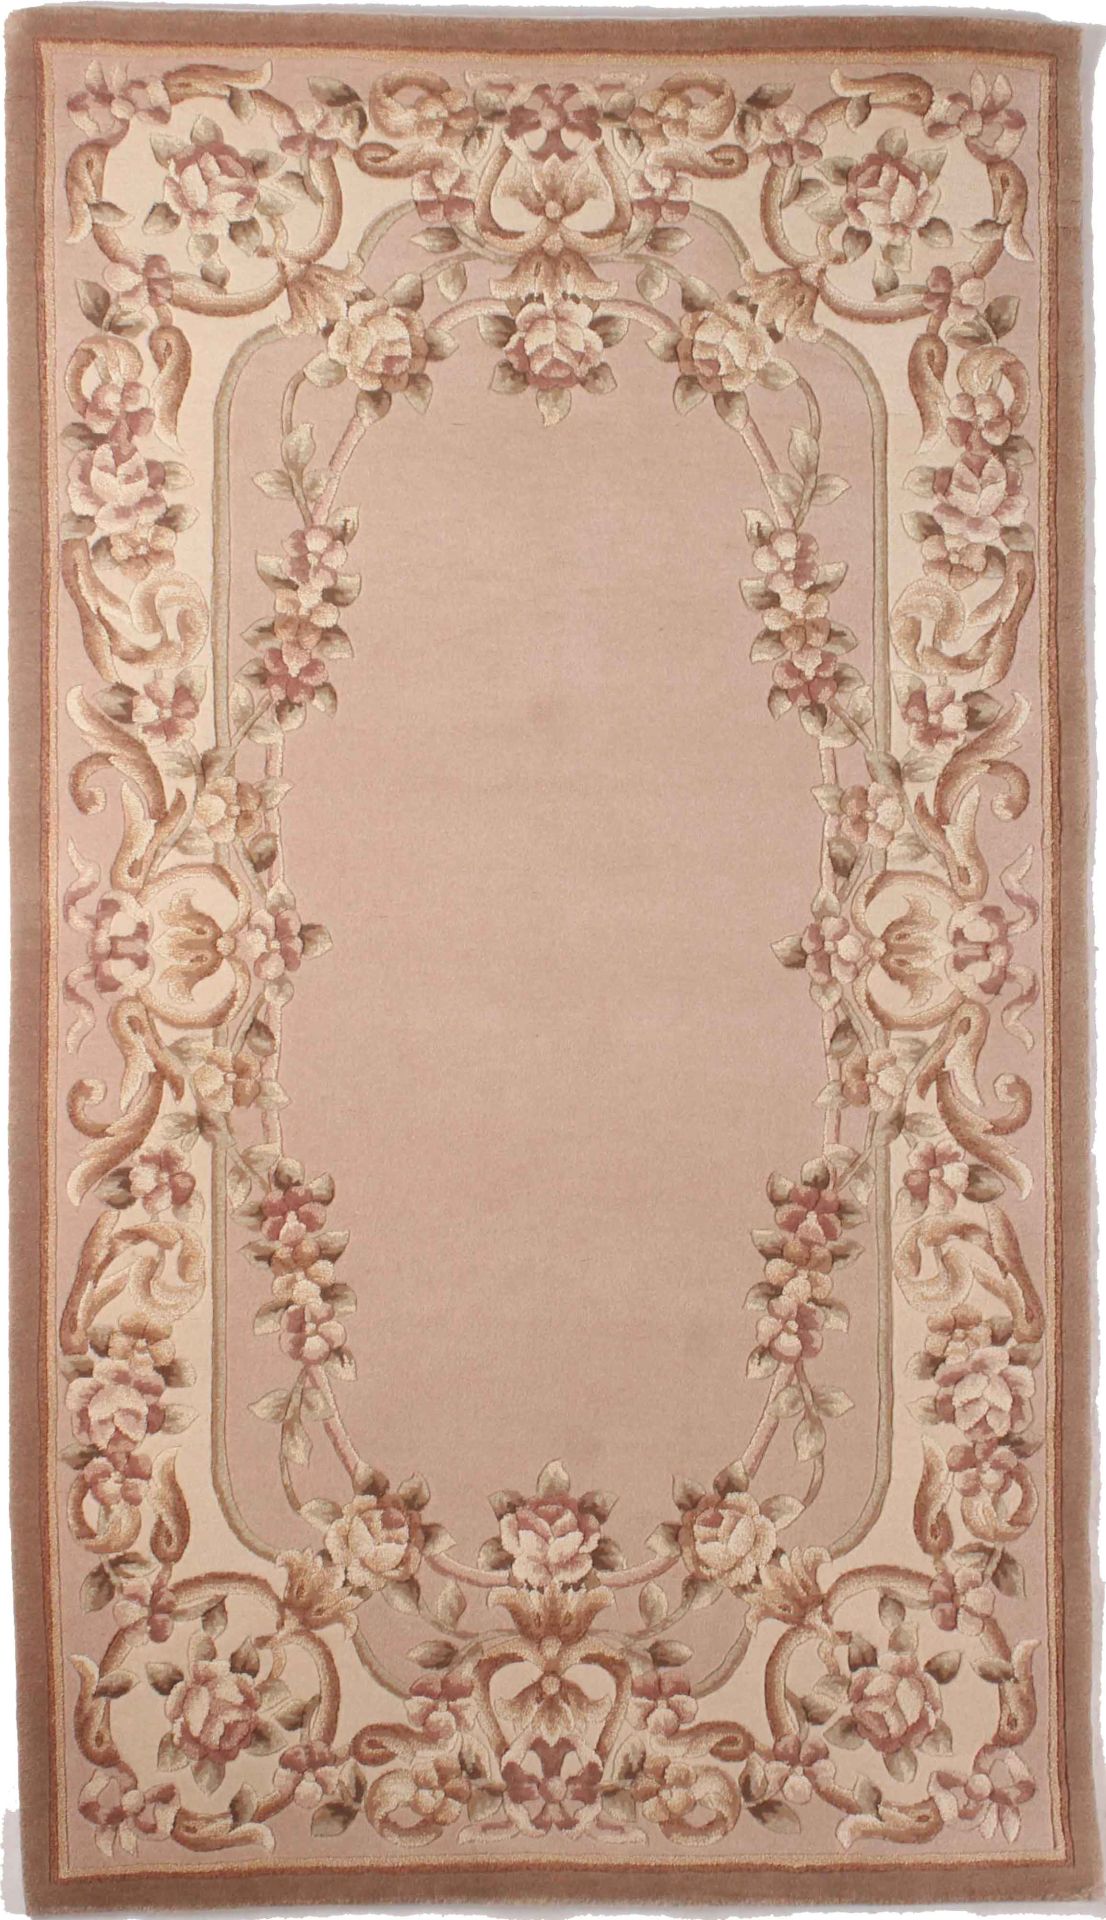 Small Size Carpet with Floral Edge